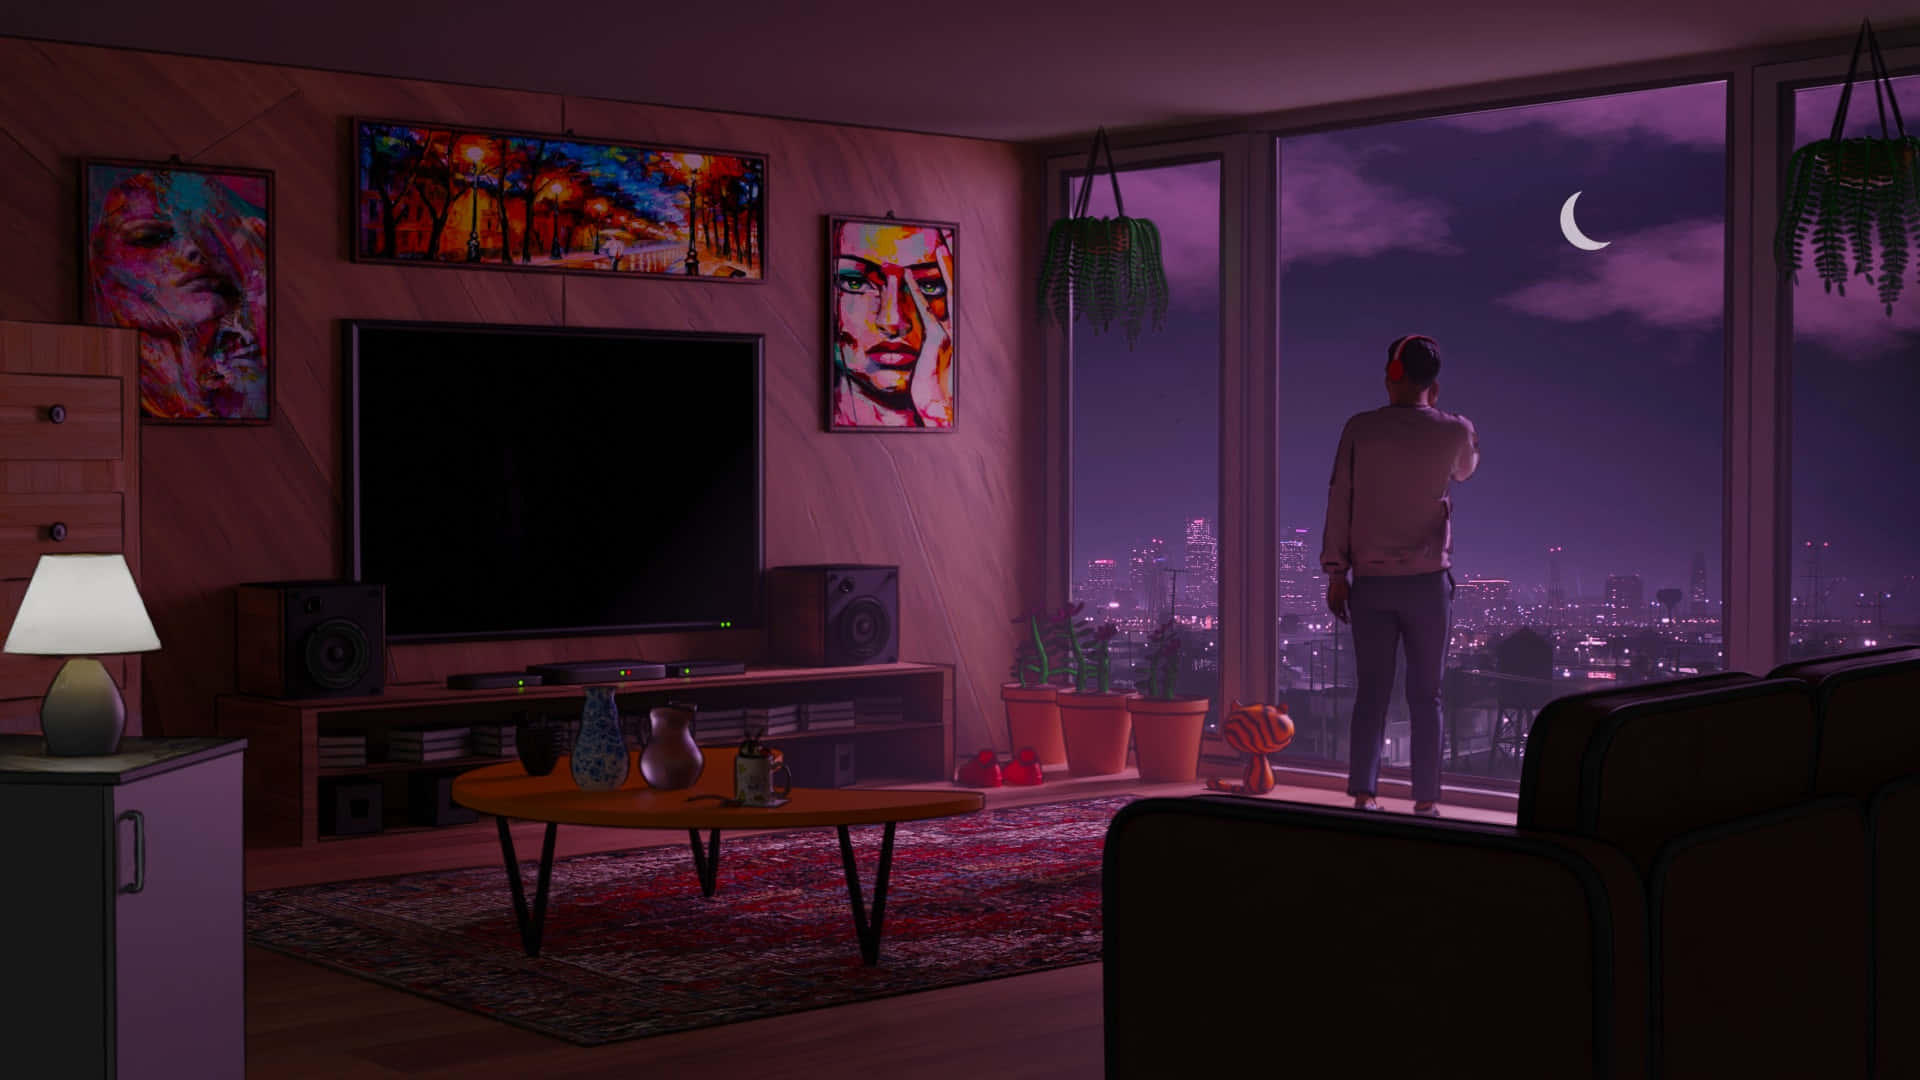 Relax, unwind and connect in Lo Fi Room Wallpaper